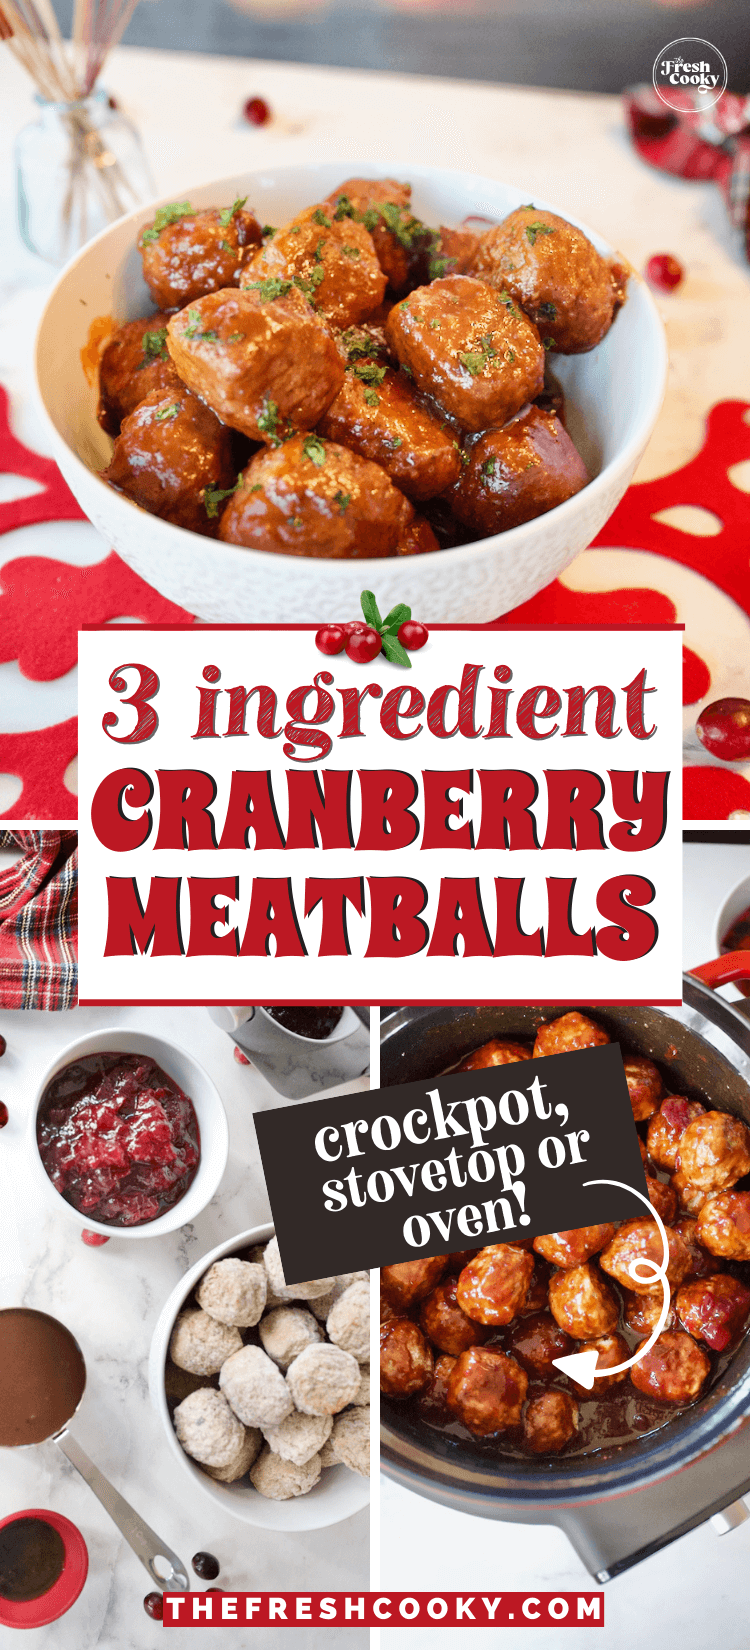 3 ingredient cranberry meatballs ingredients, in crockpot and in serving bowl, for pinning.